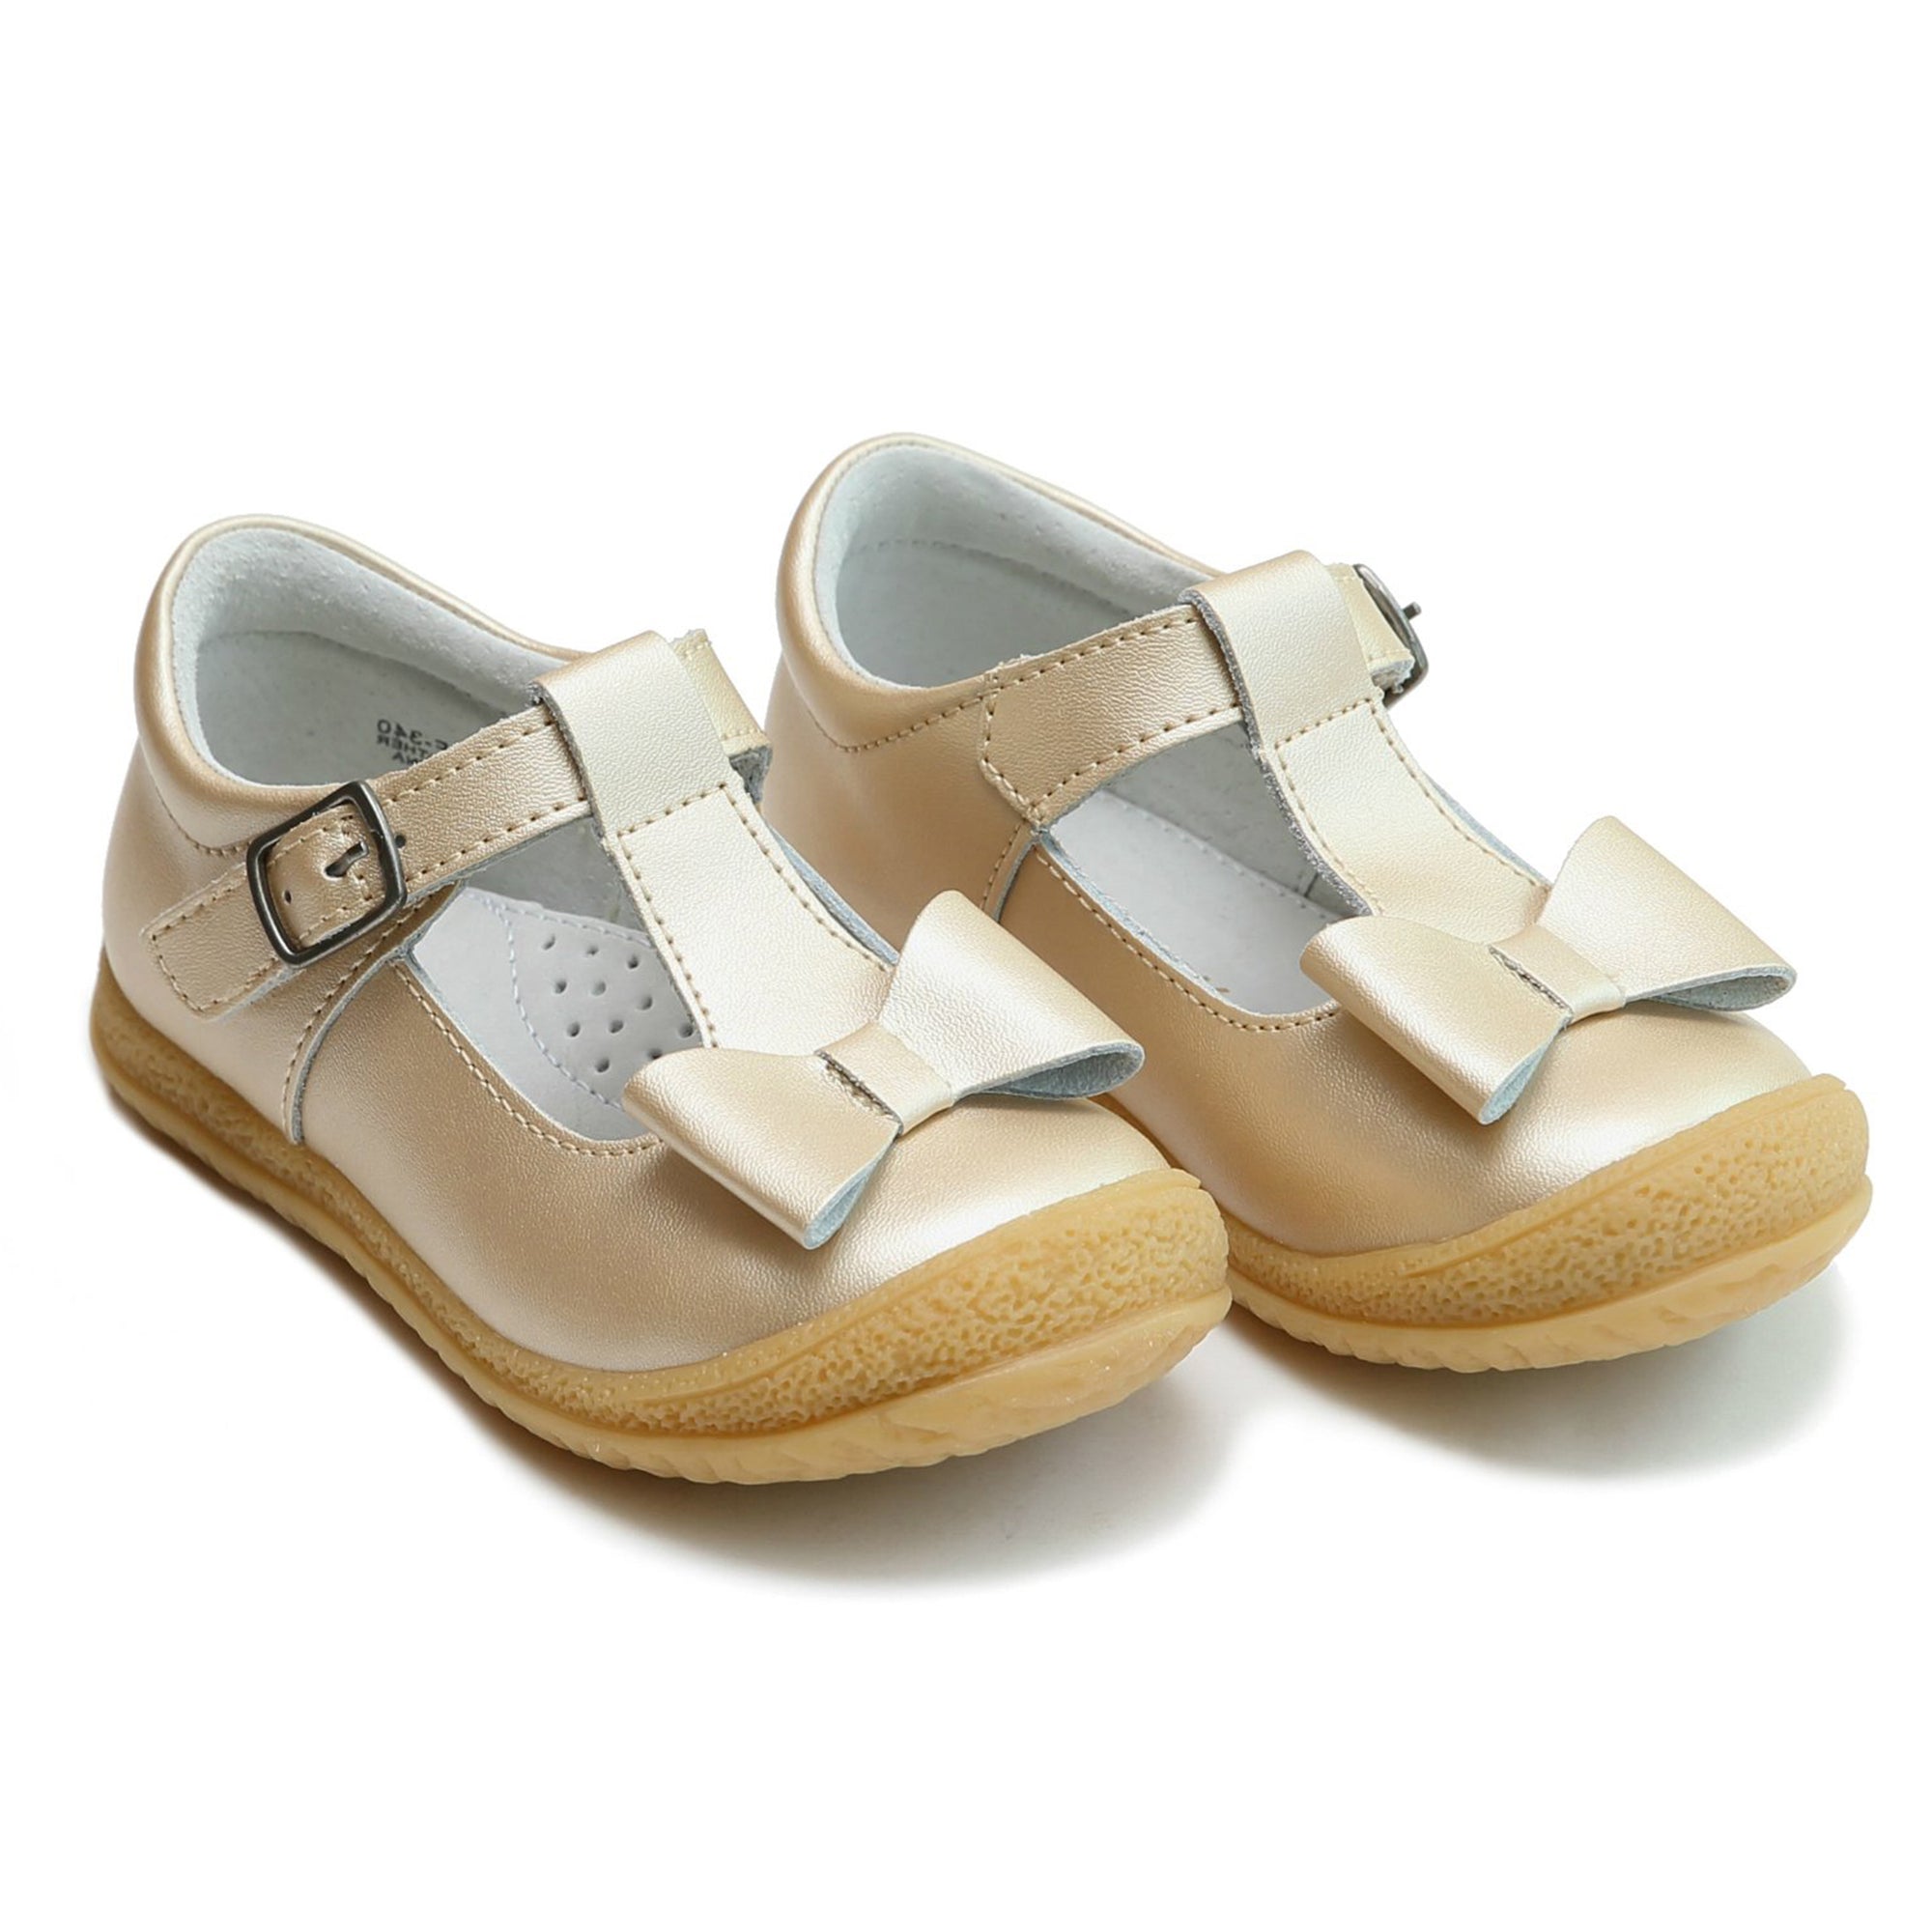 L'Amour Little Girl's Champagne Shimmer T-Strap Mary Jane Bow Shoes